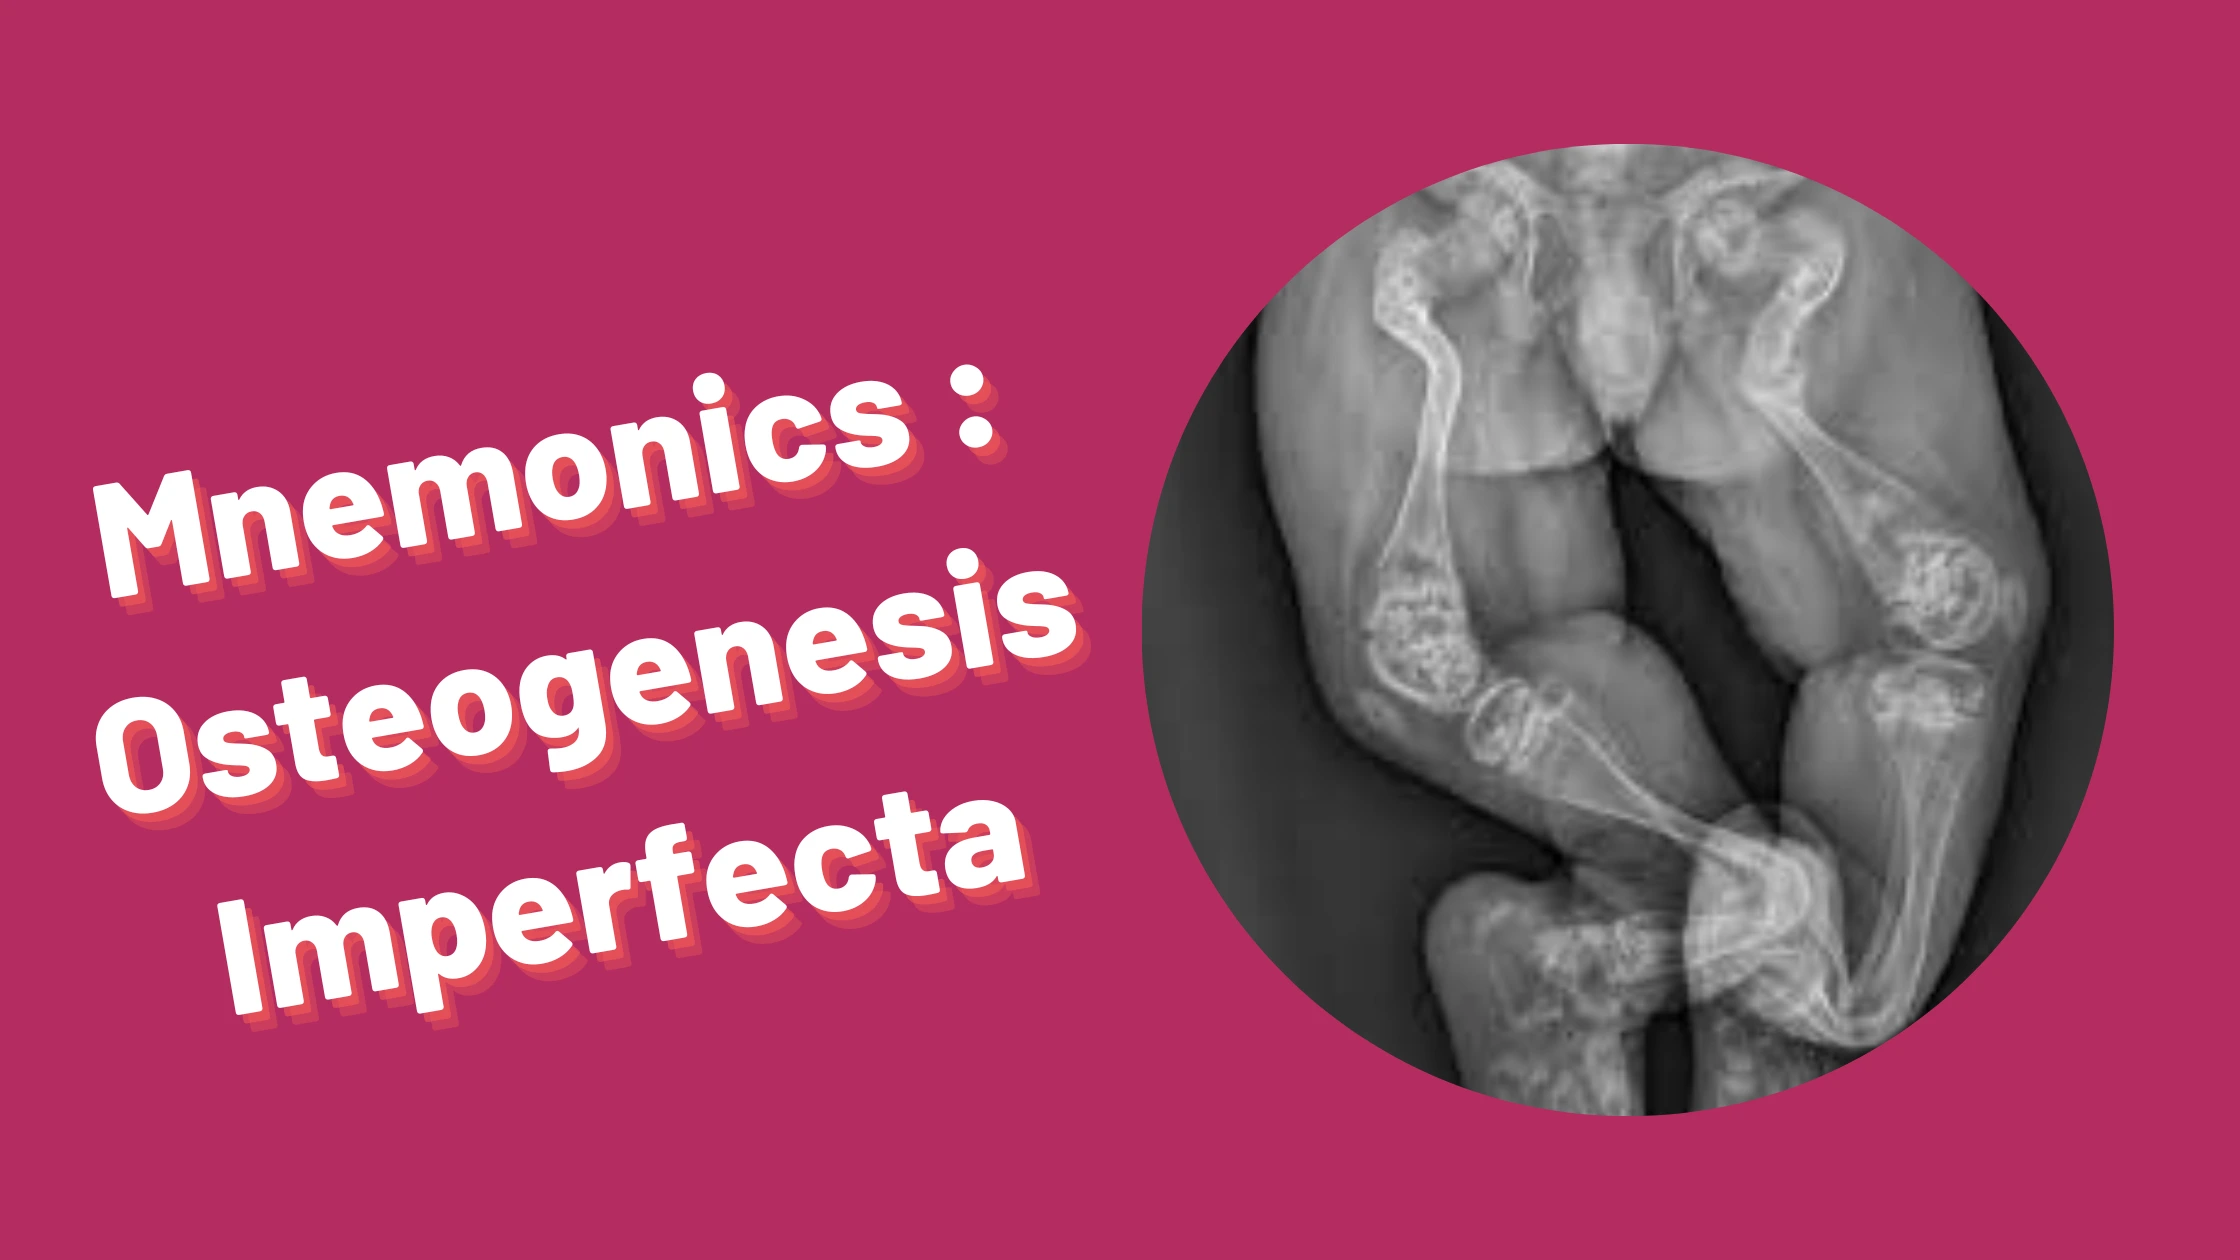 You are currently viewing [Very Cool] Mnemonic : Osteogenesis Imperfecta